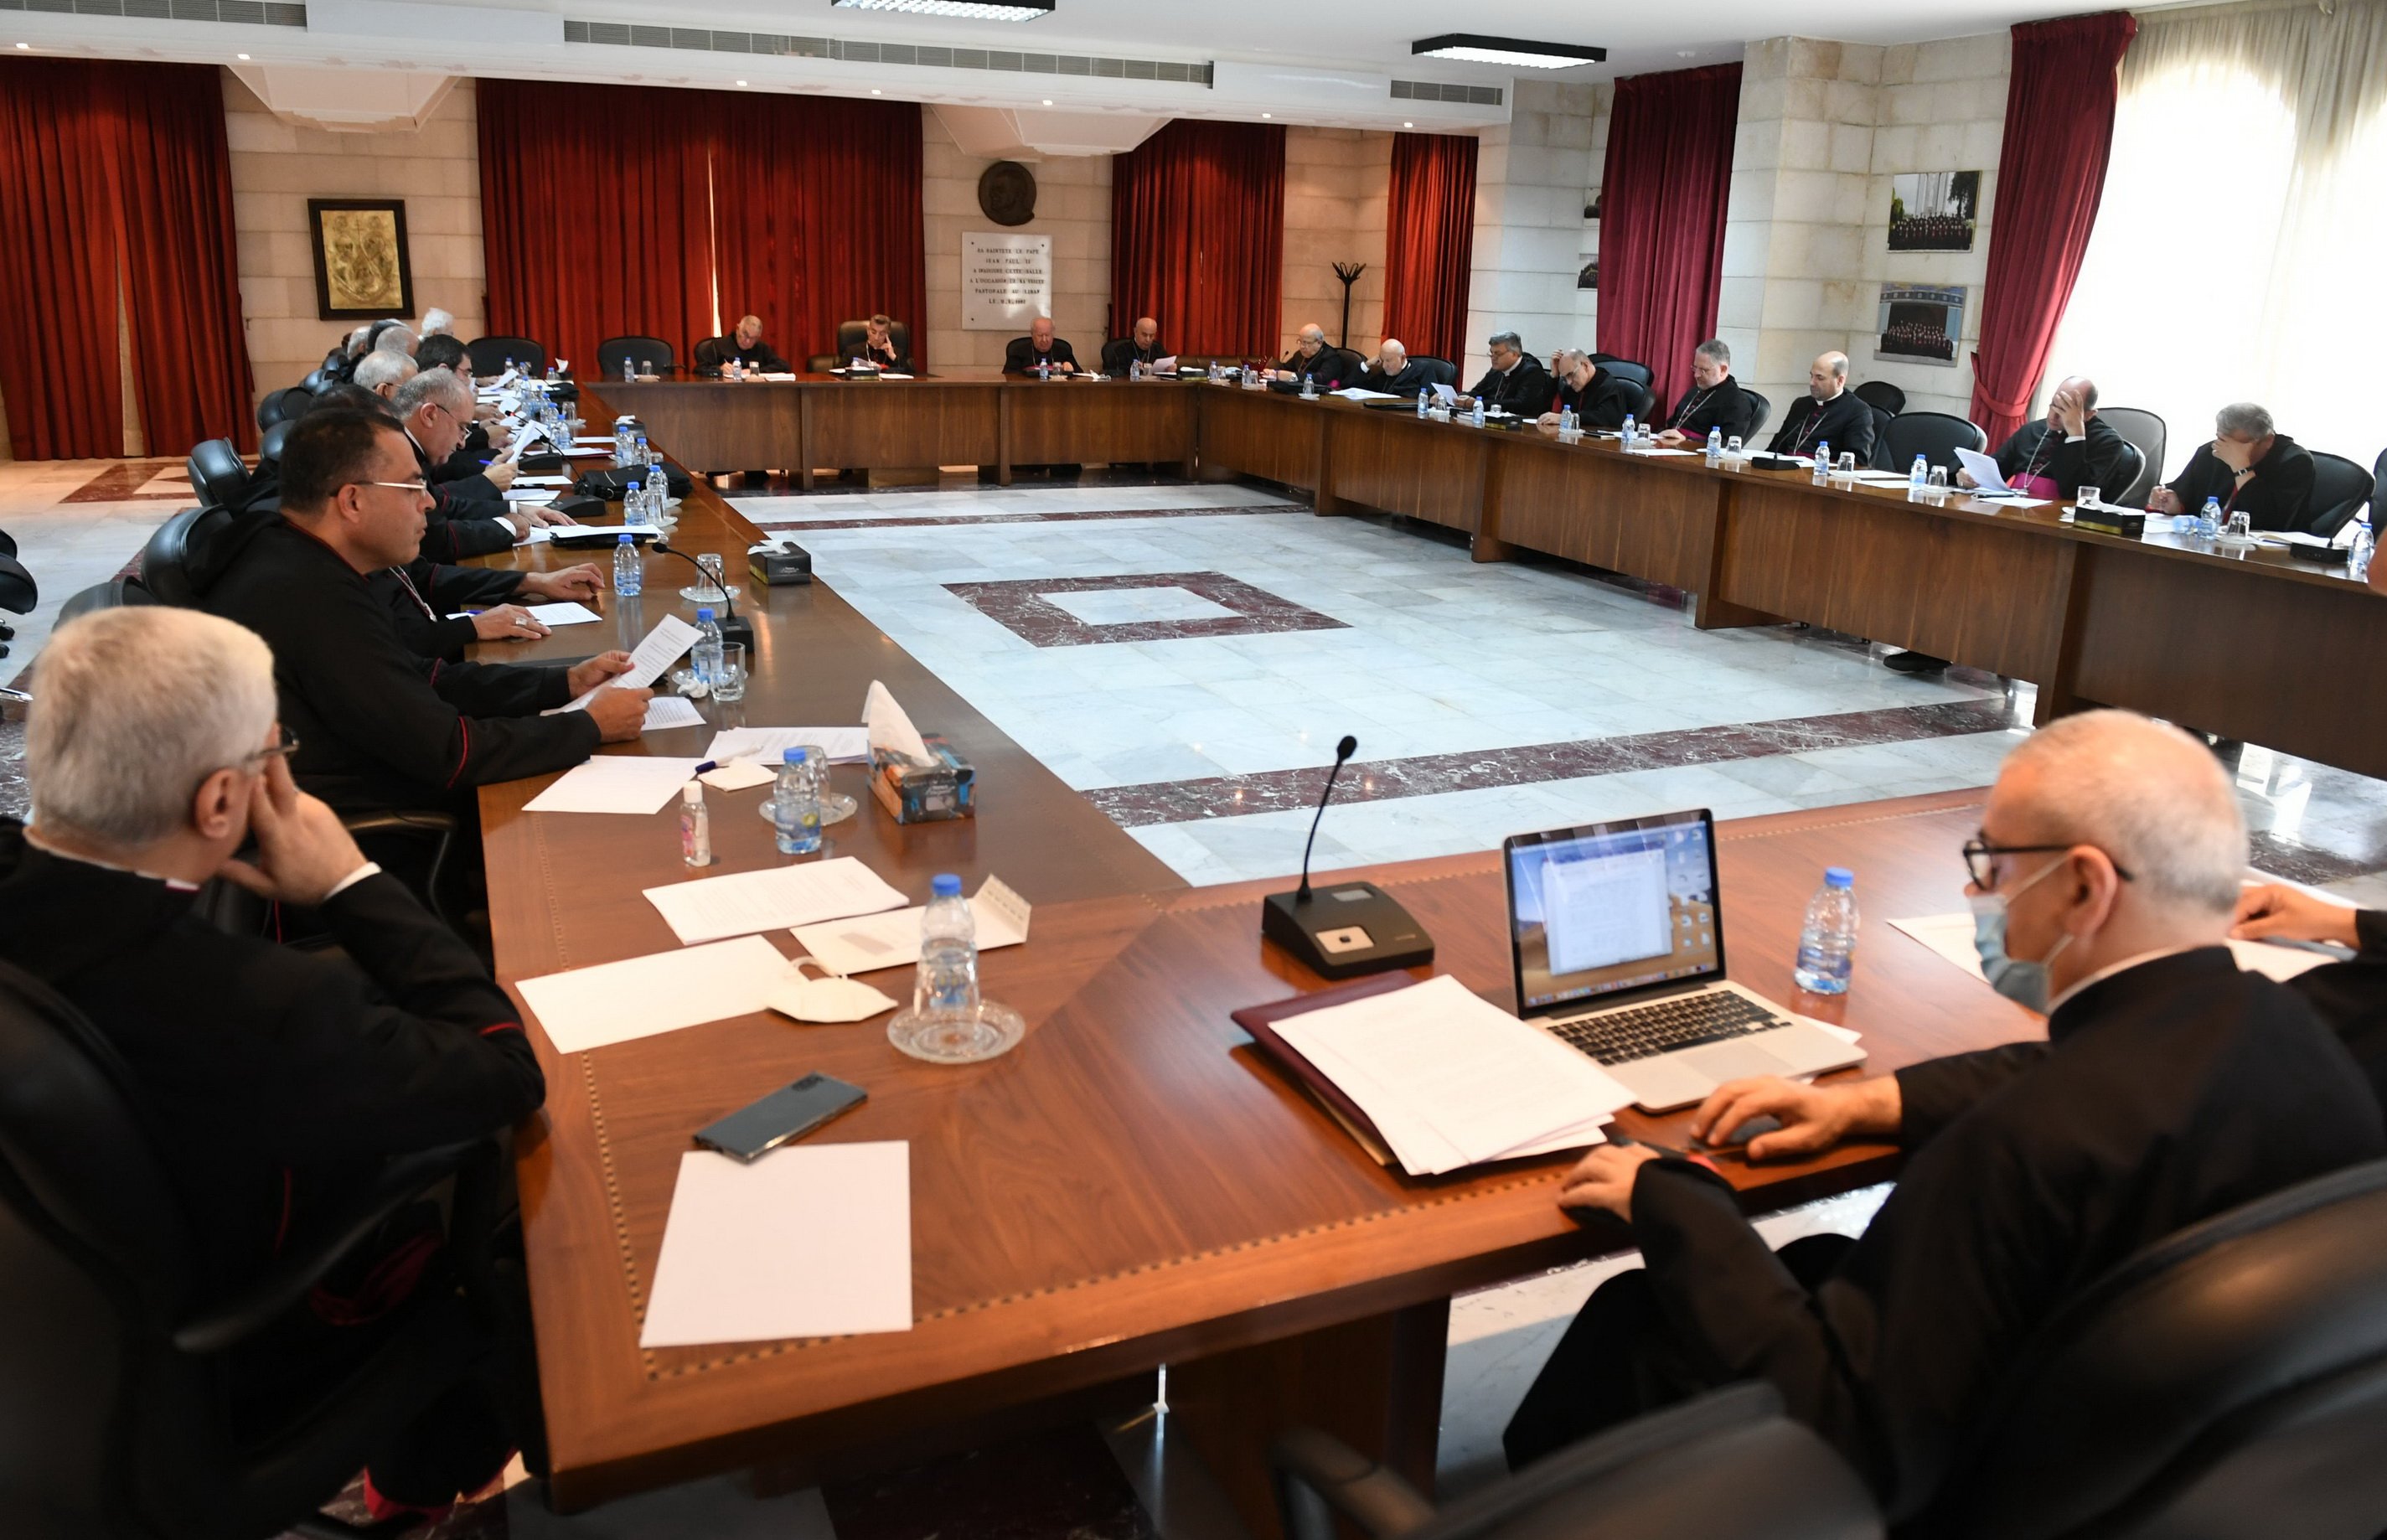 Maronite Catholic bishops of Lebanon participate in a monthly meeting at Bkerke, the Maronite patriarchate near Beirut, Sept. 1, 2021. (CNS photo/Mychel Akl, courtesy Maronite Patriarchate)